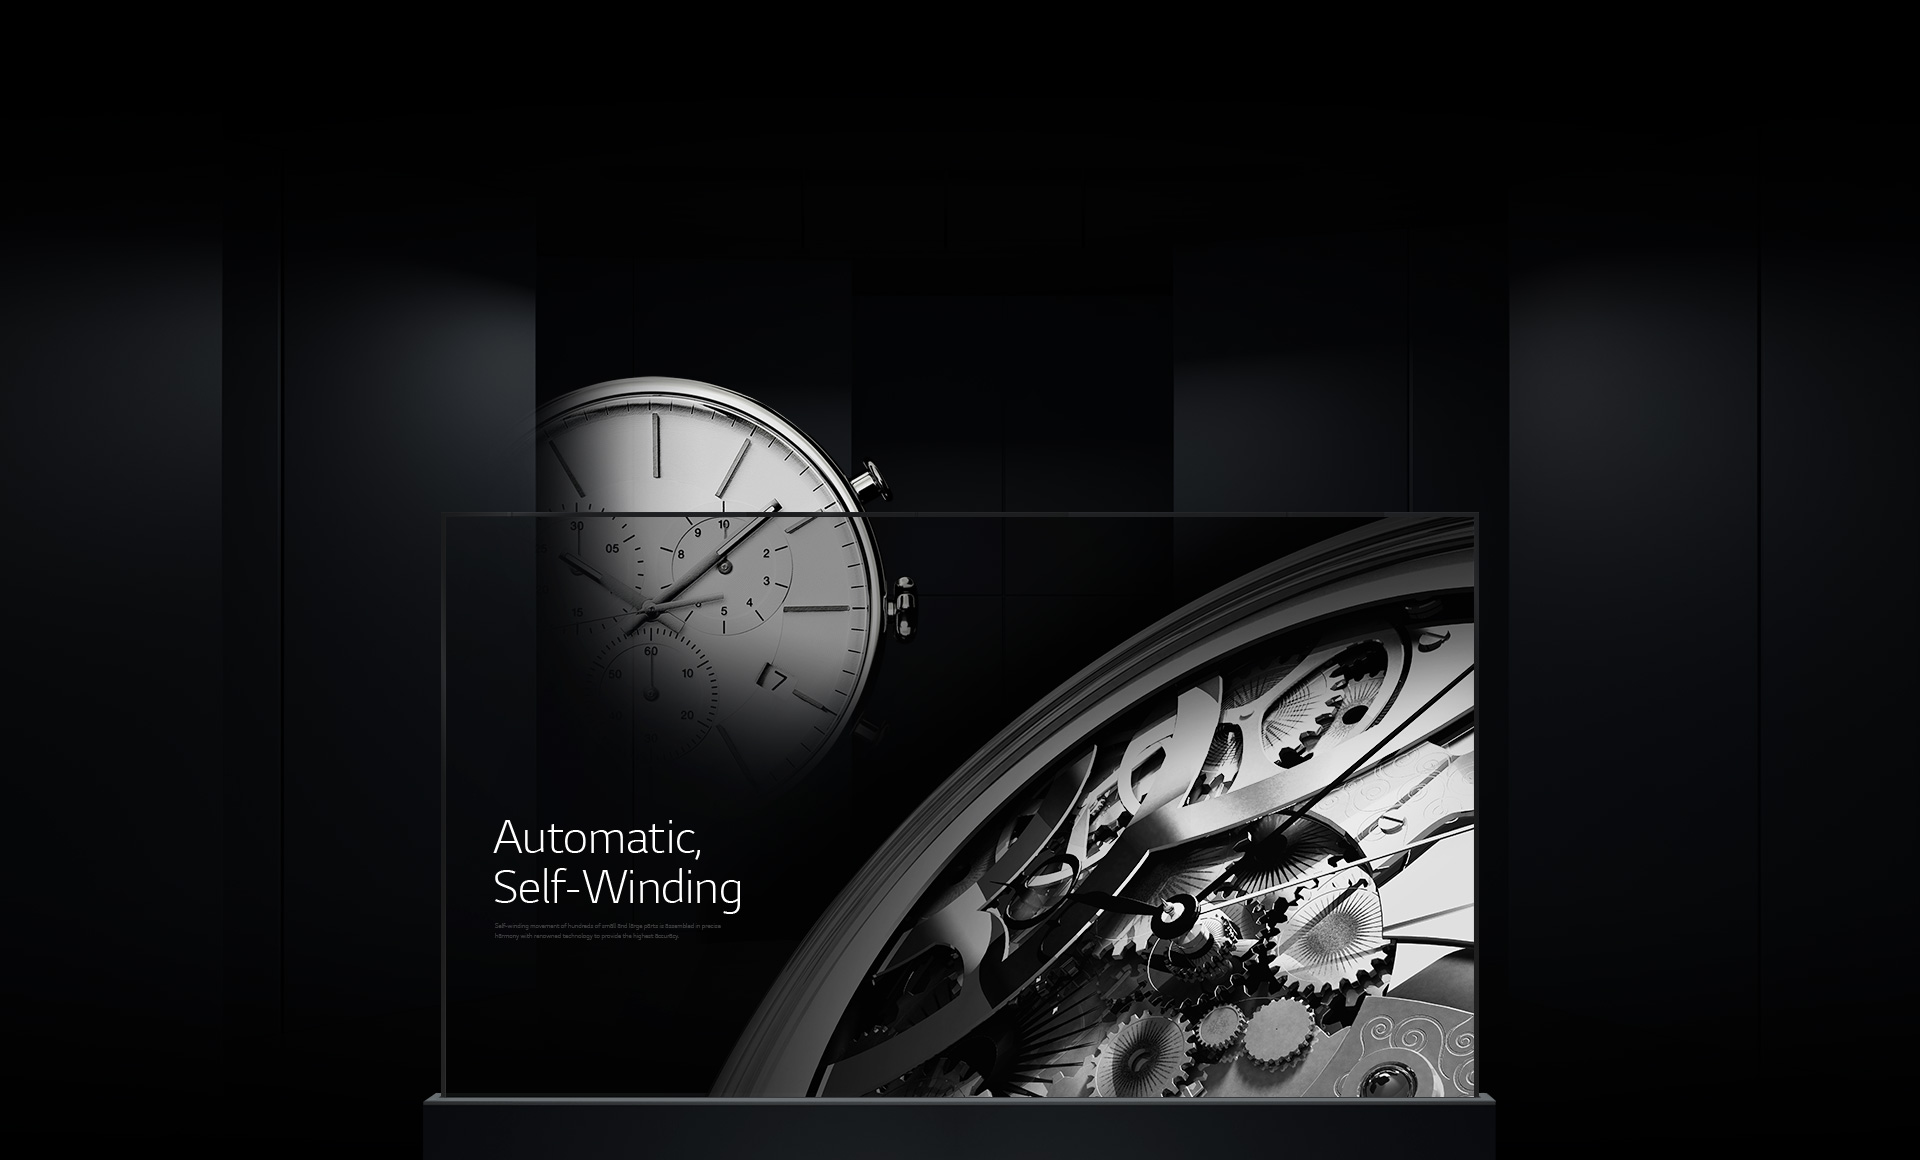 Imagery of automatic and movement parts displayed on a single Transparent OLED signage overlaid with a luxurious watch image in the background.